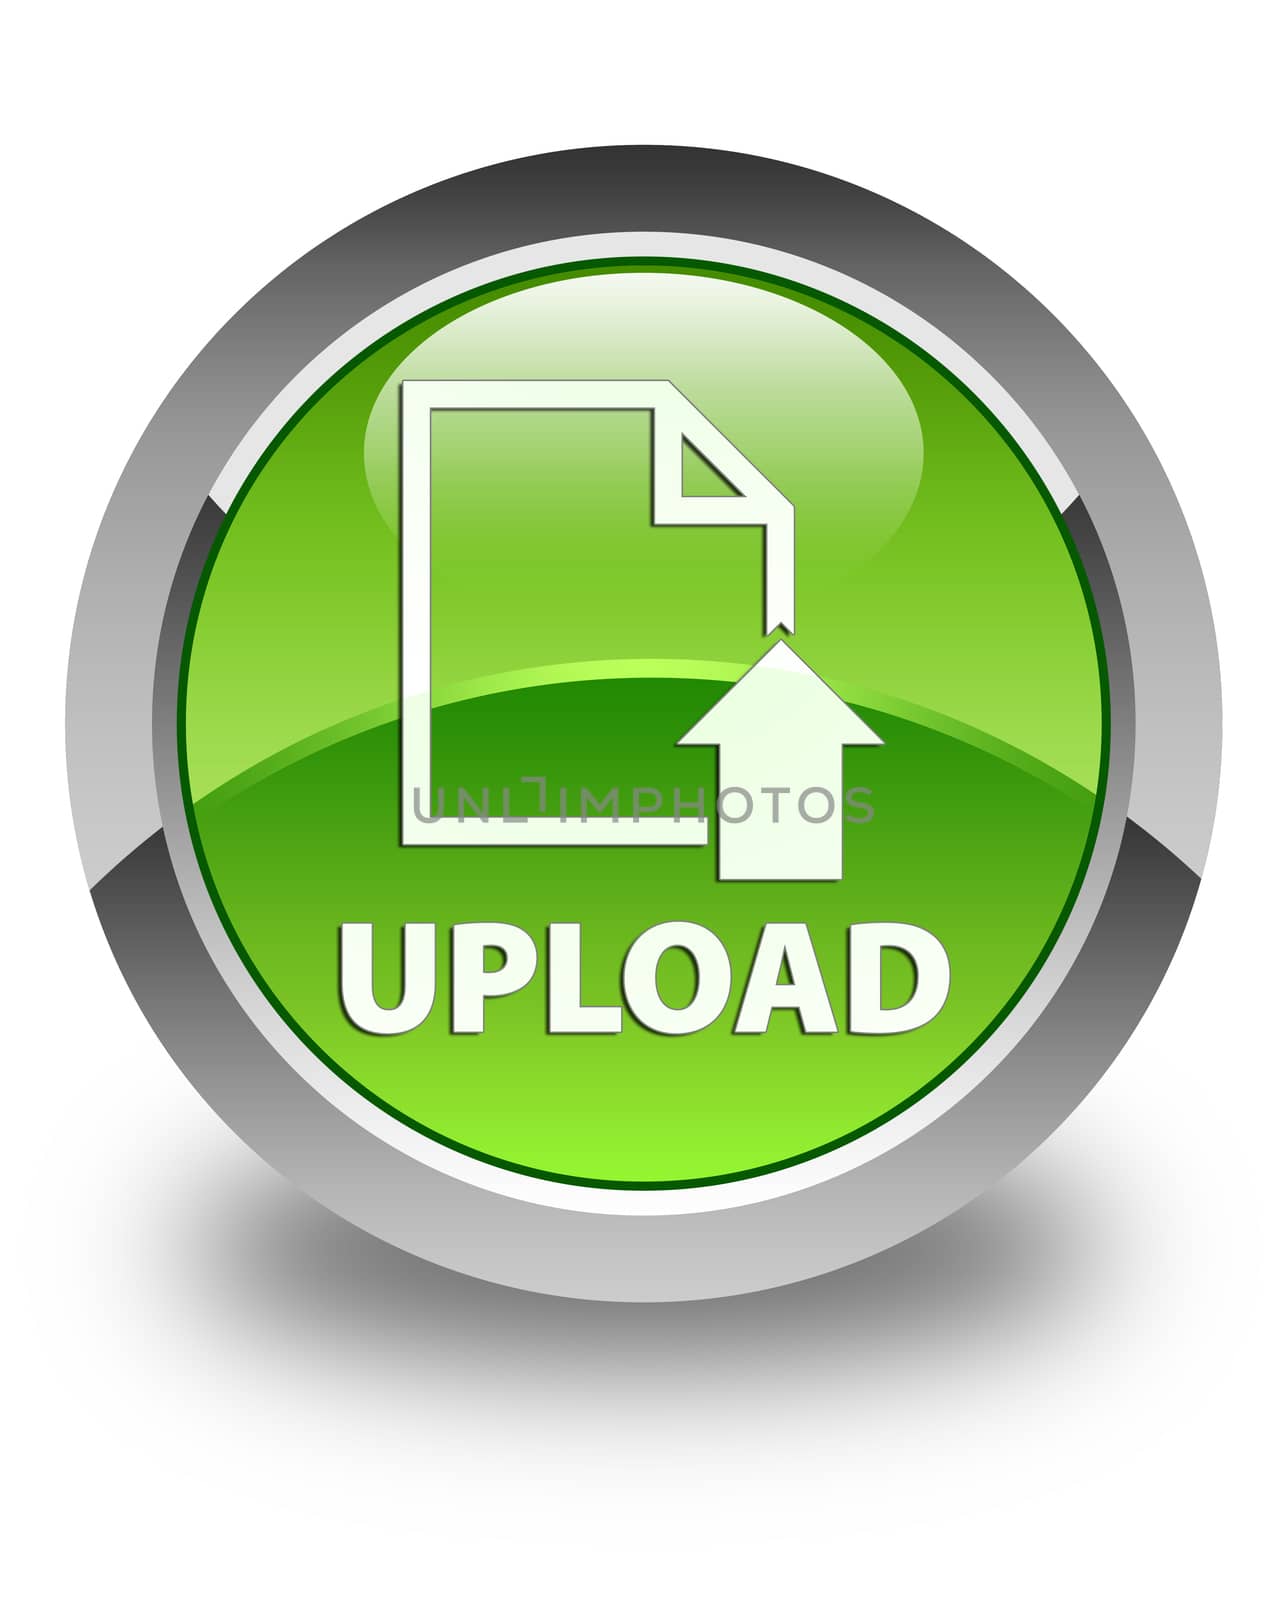 Upload (document icon) on glossy green round button